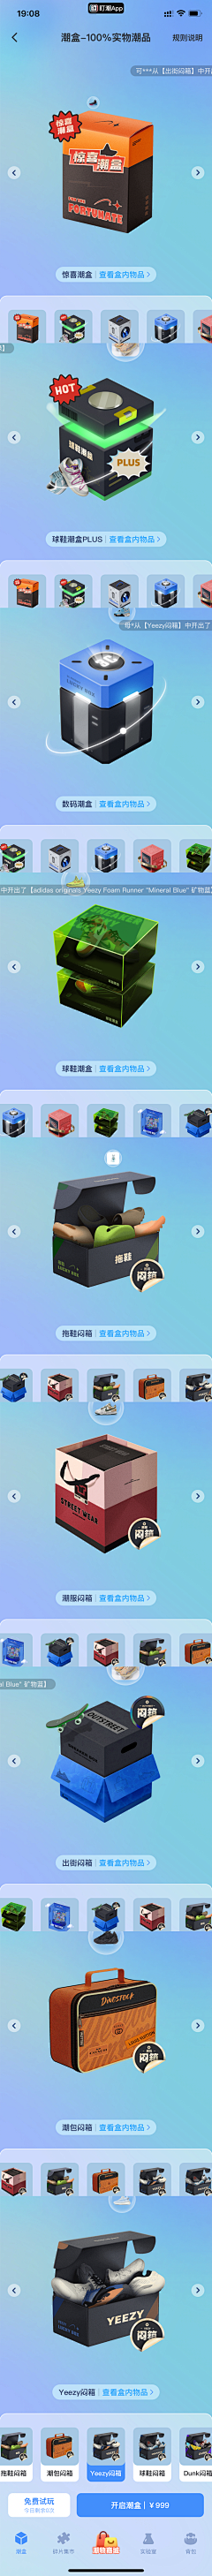 will_zhang采集到3D页面